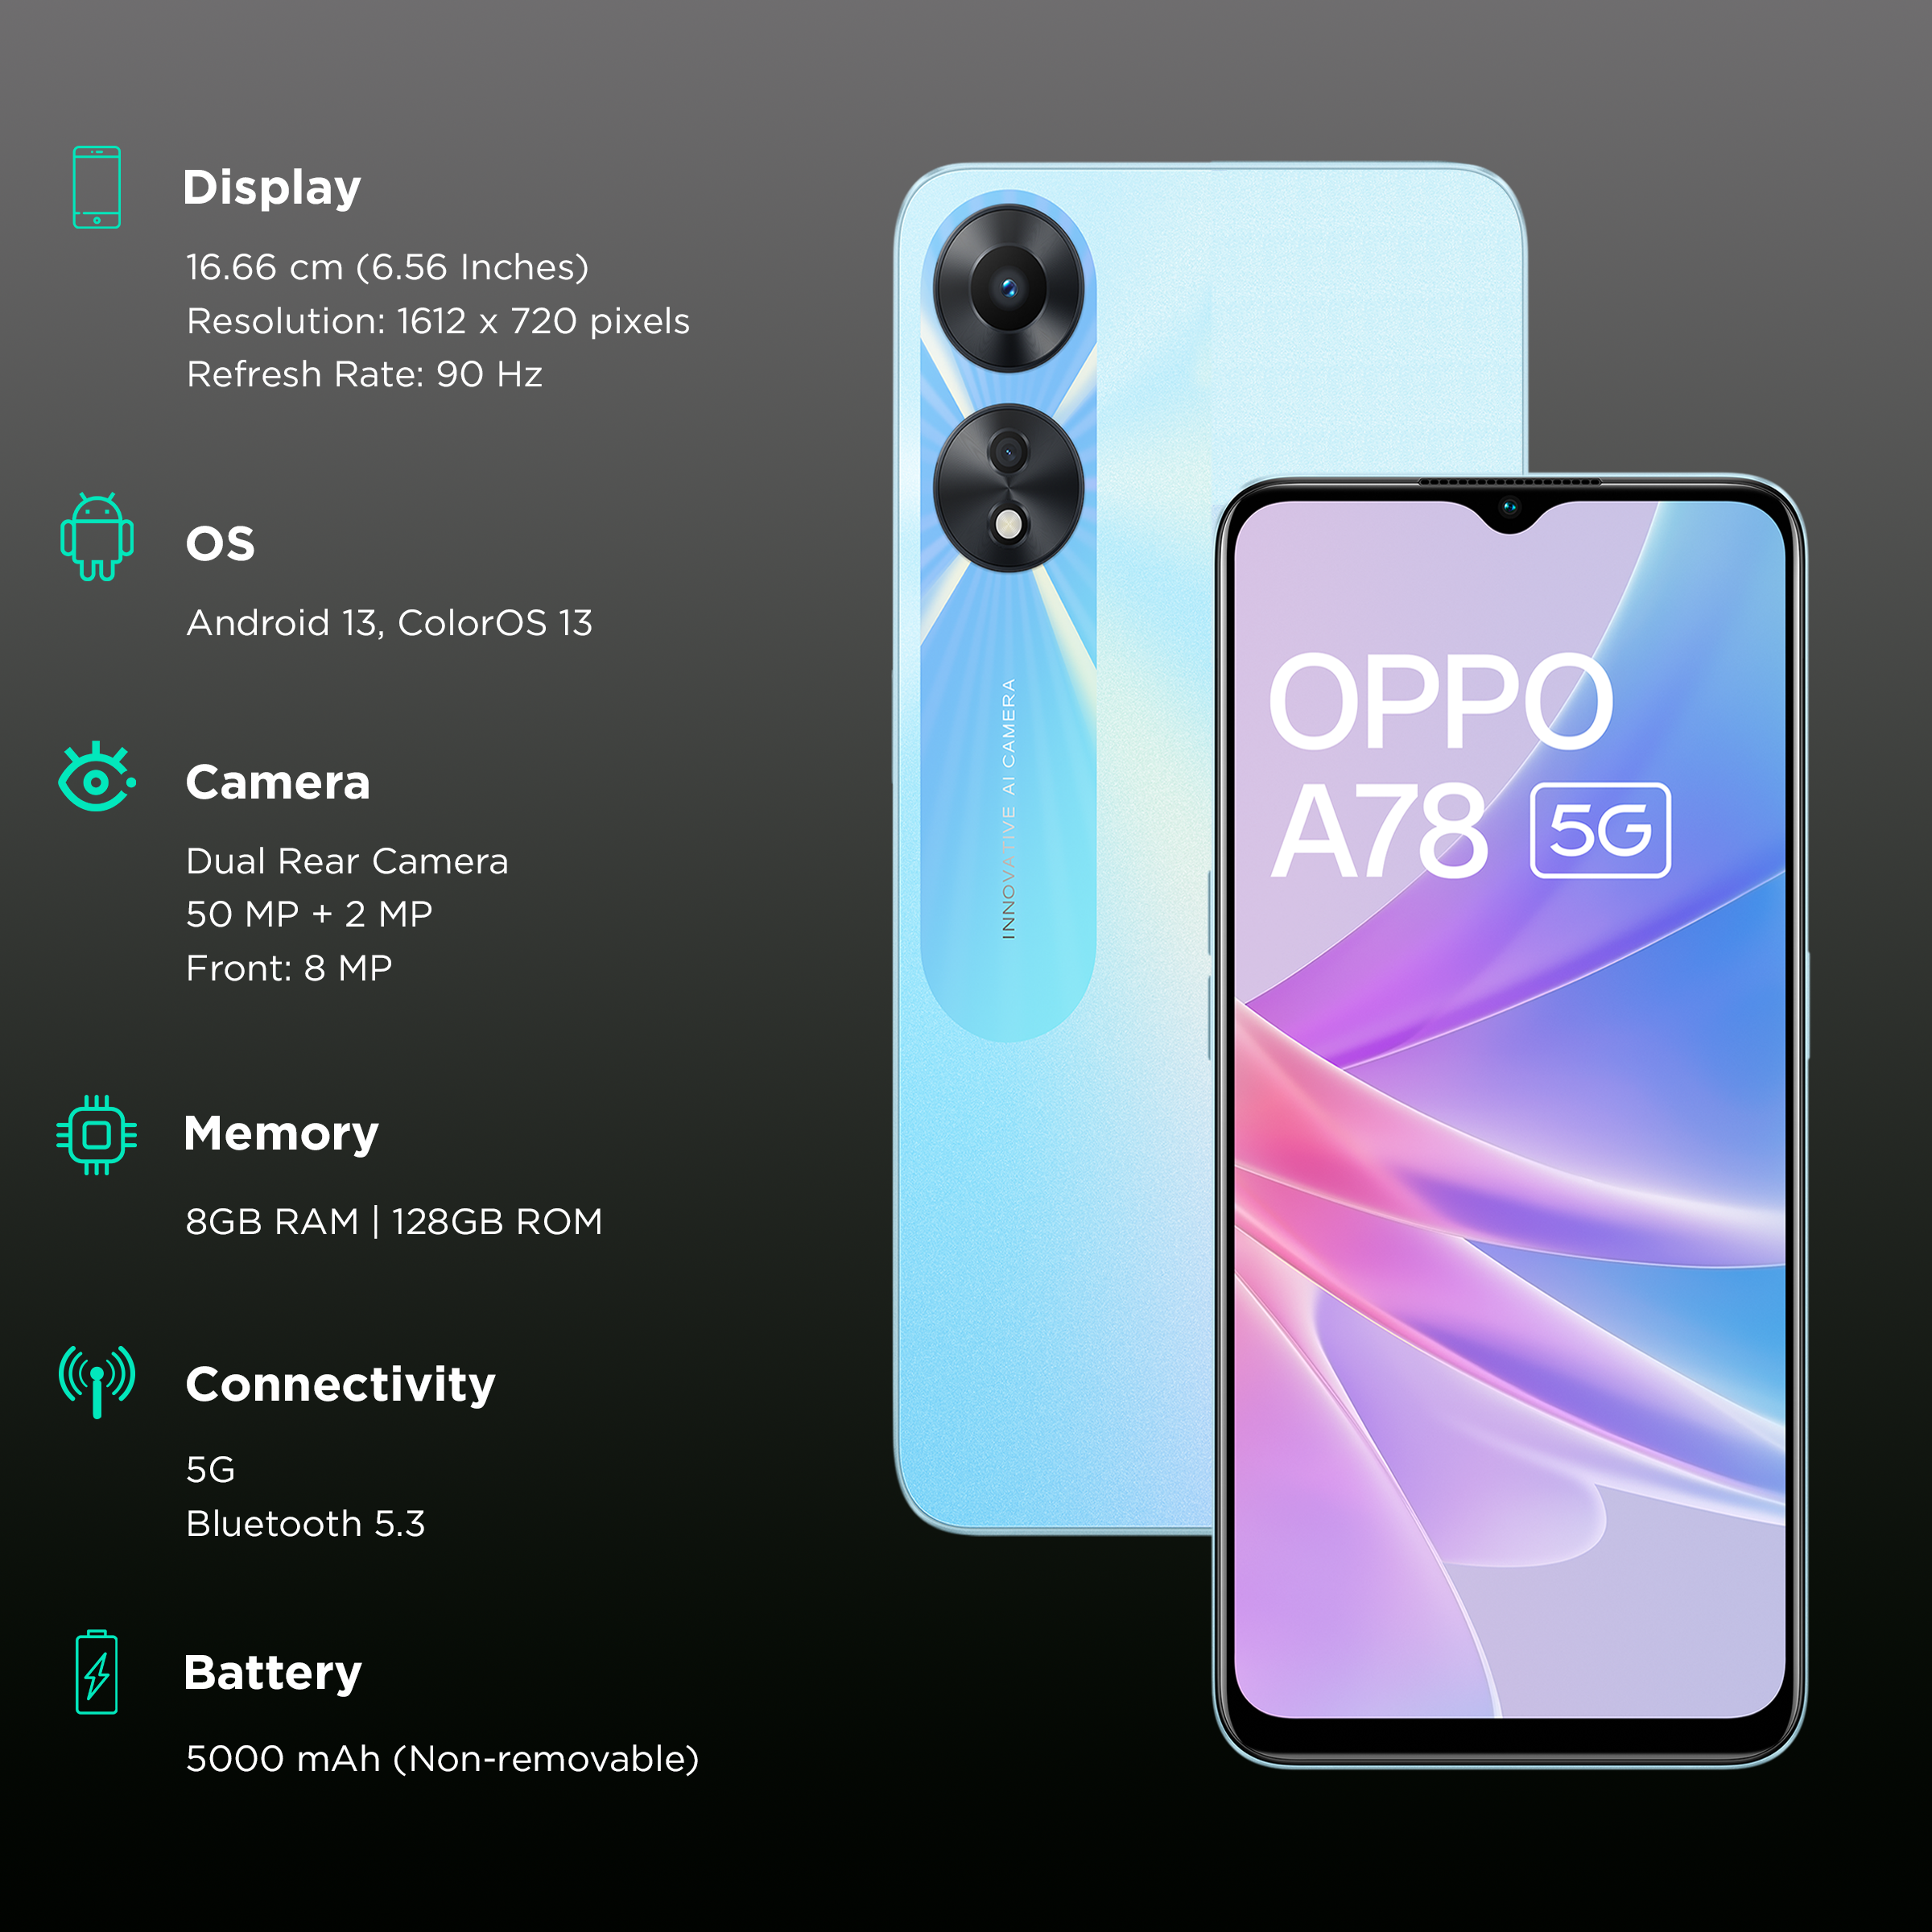 OPPO A78 5G - Price in India, Specifications, Features